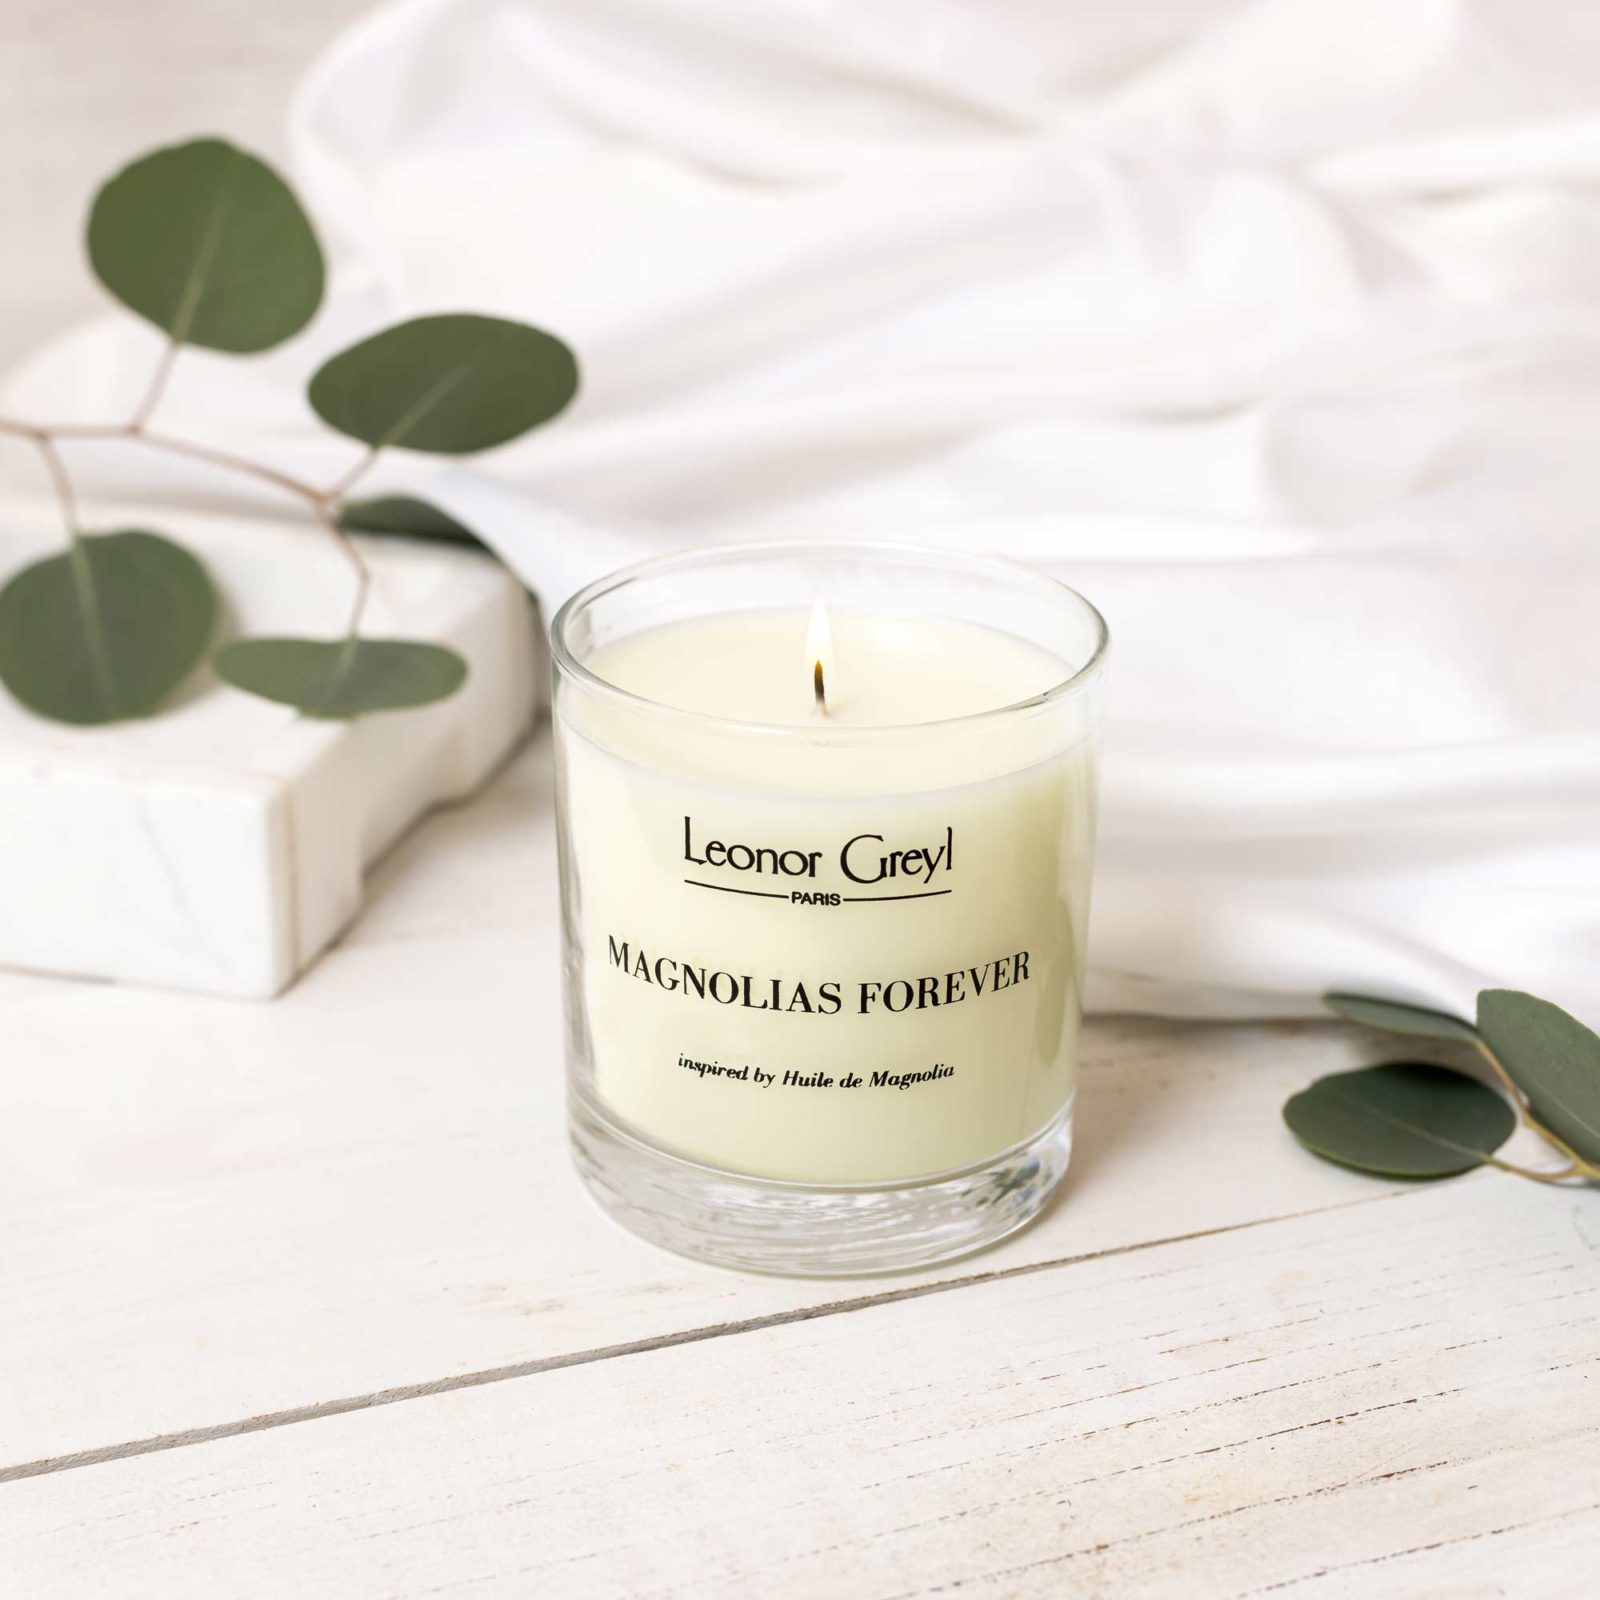 Leonor Greyl Magnolias Forever candle with white fabric & greenery